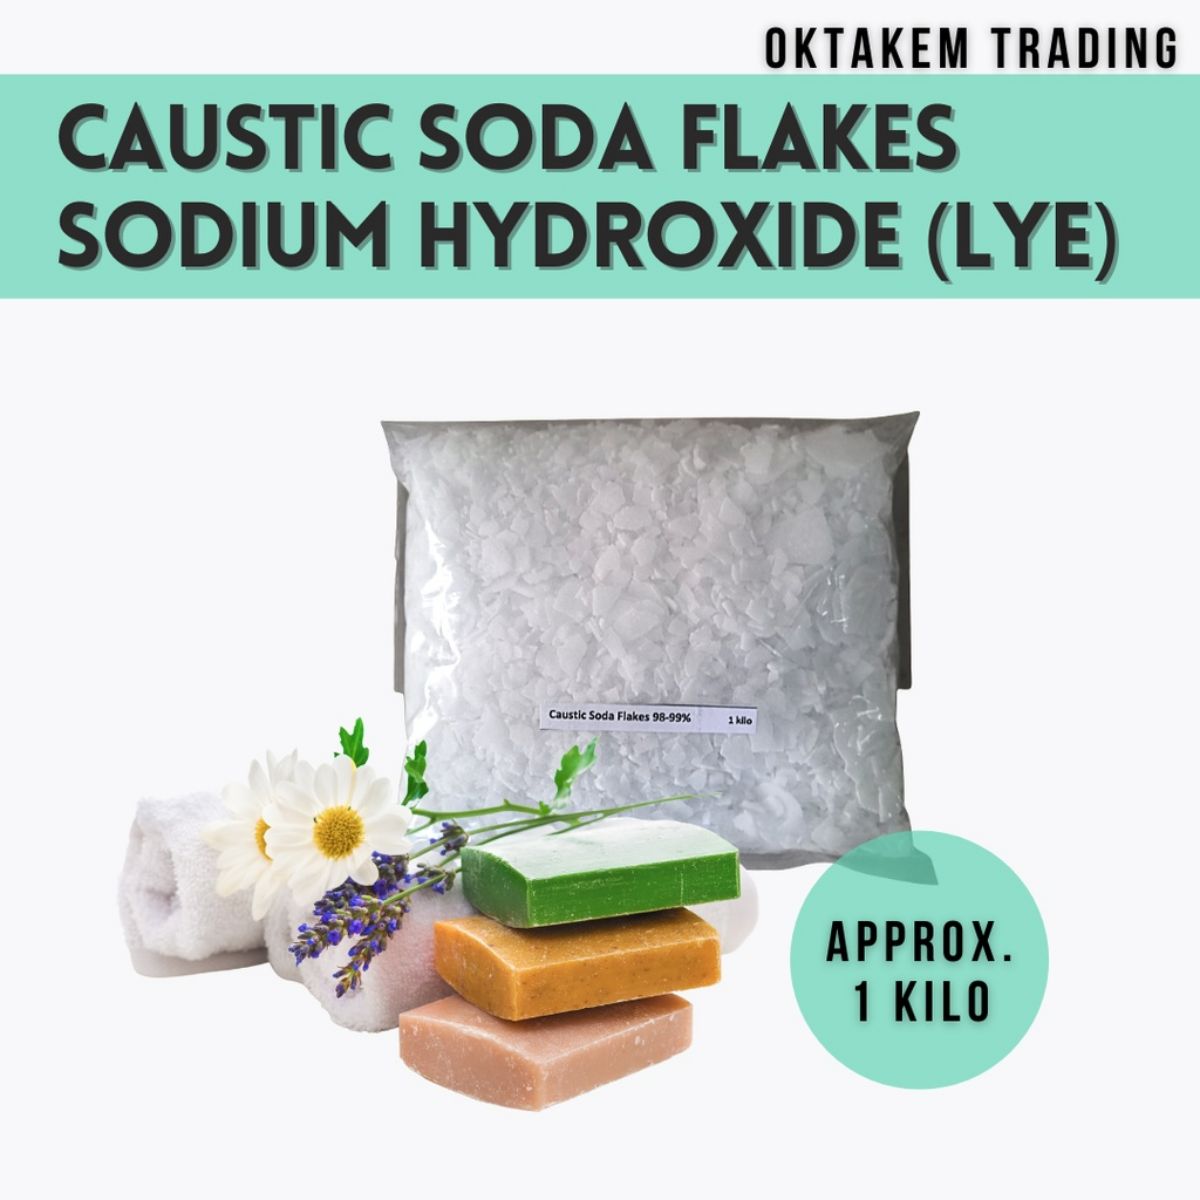 How to Get Caustic Soda